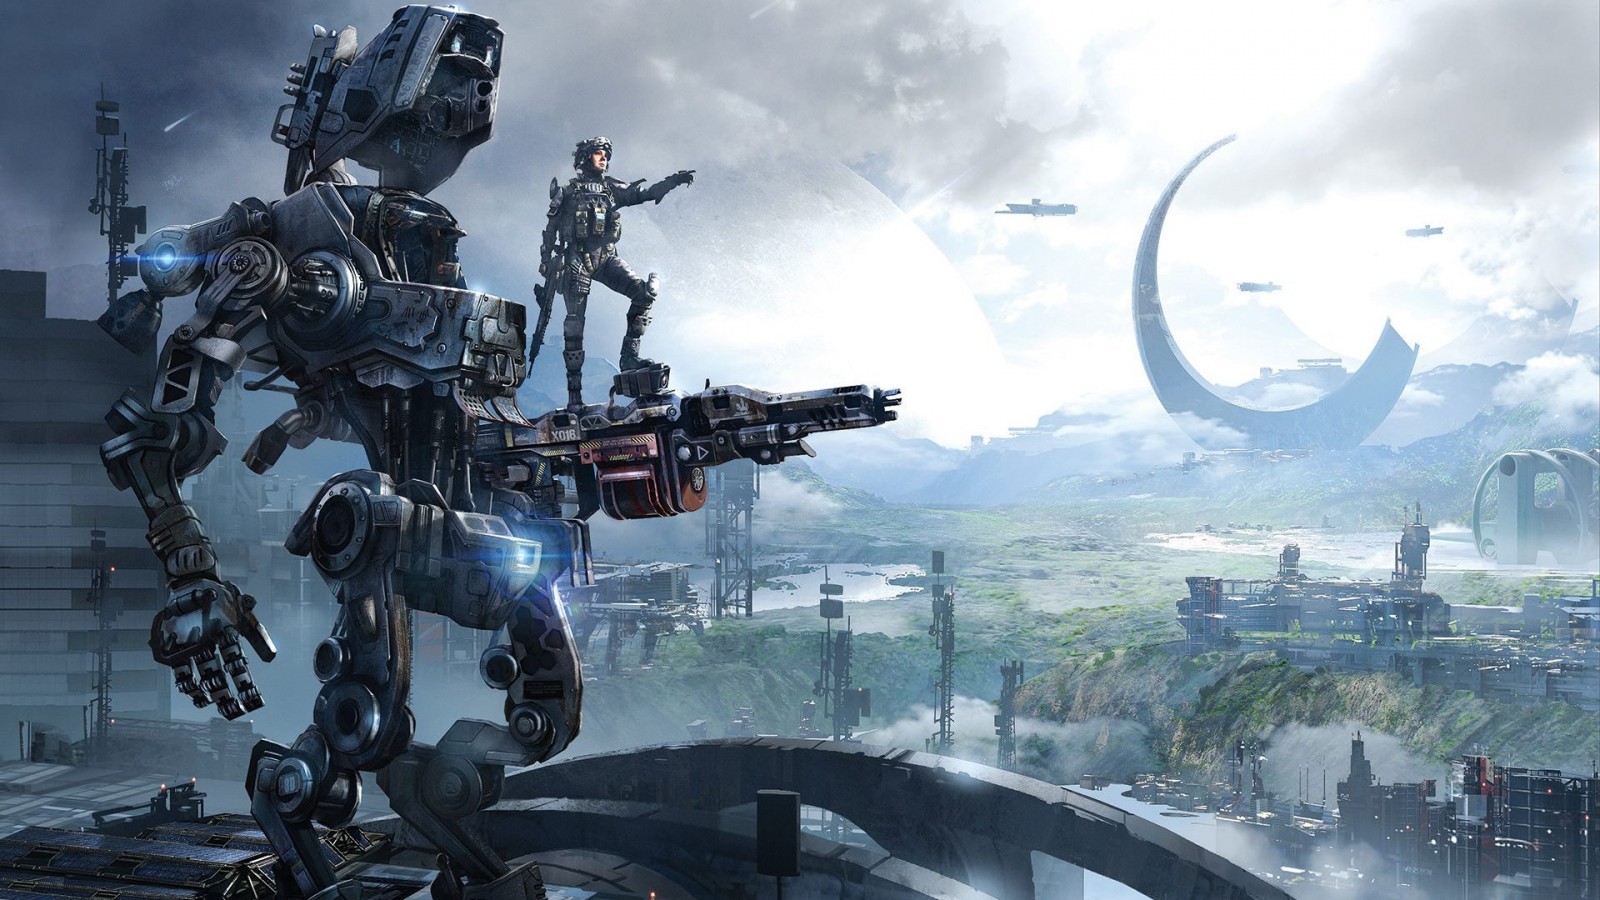 General 1600x900 Titanfall video games video game art PC gaming science fiction mechs